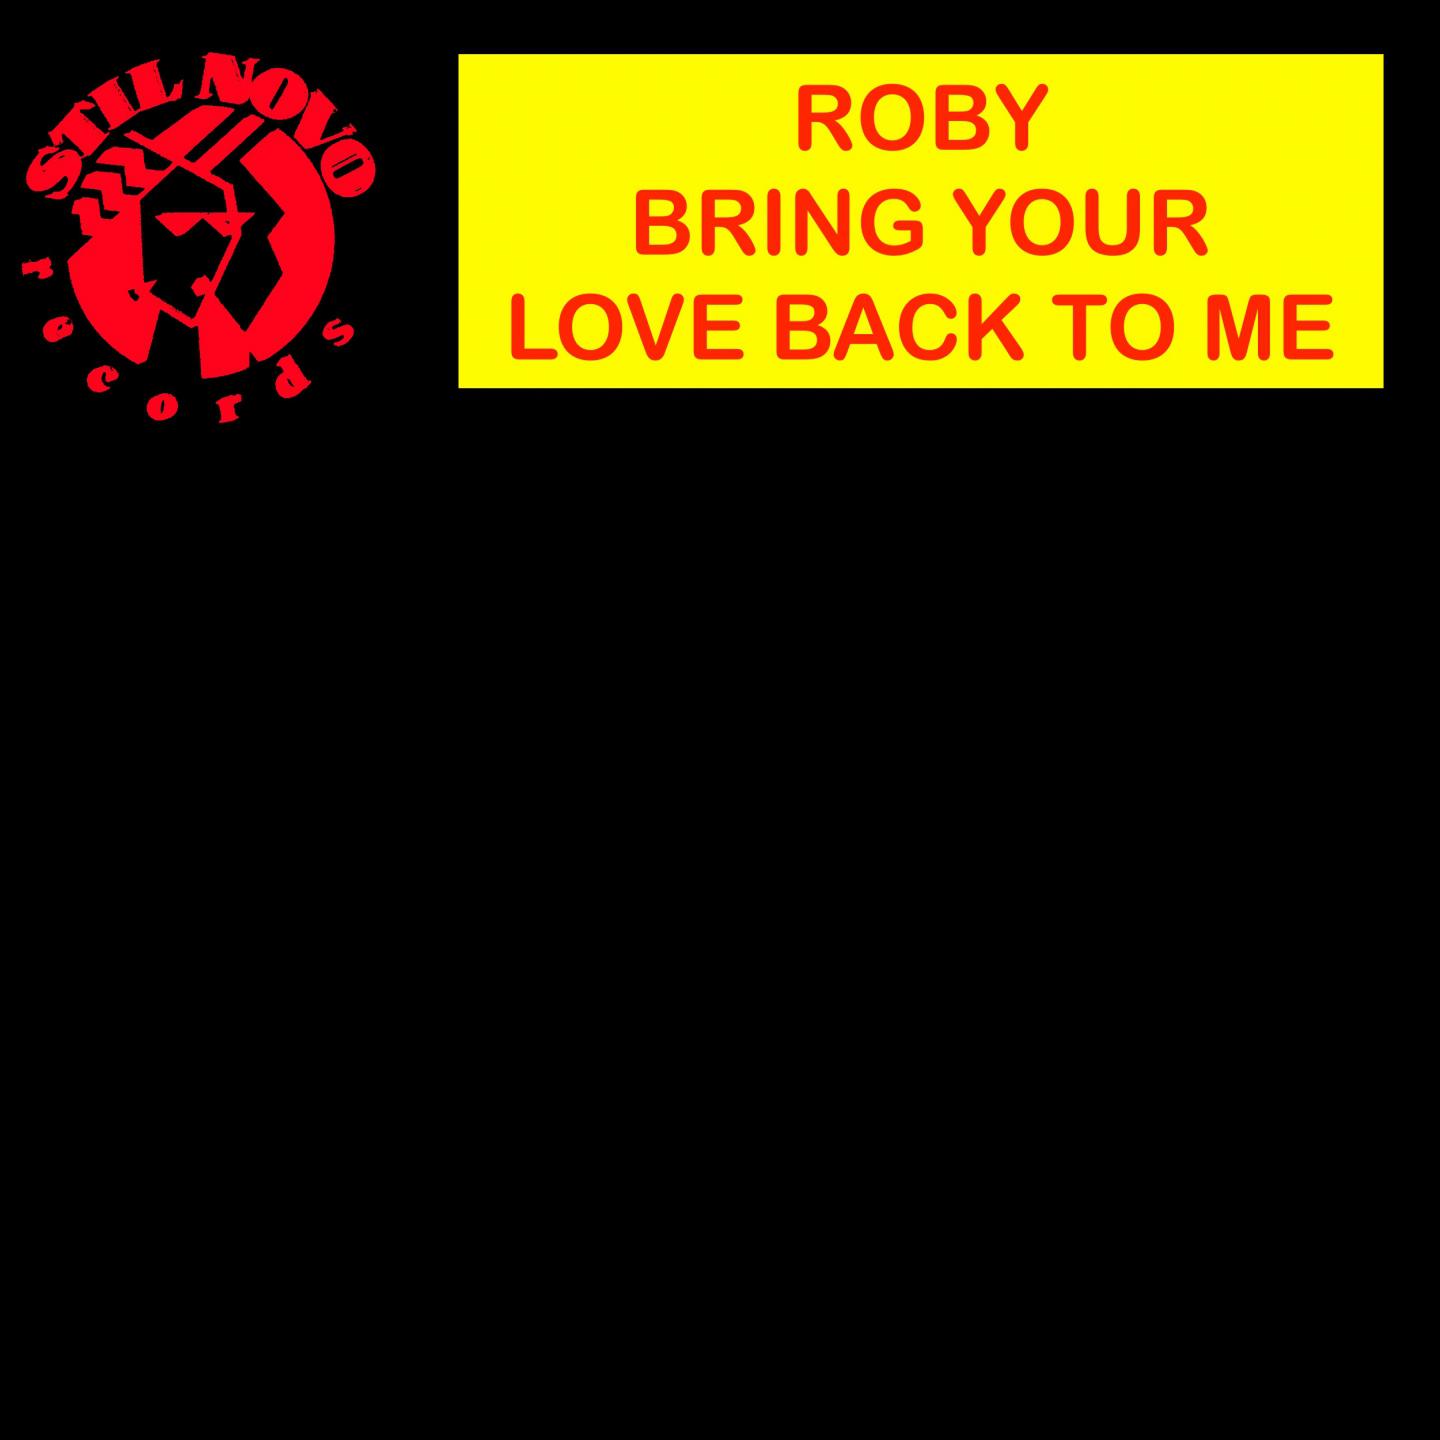 Bring Your Love Back to Me (Mix Version)